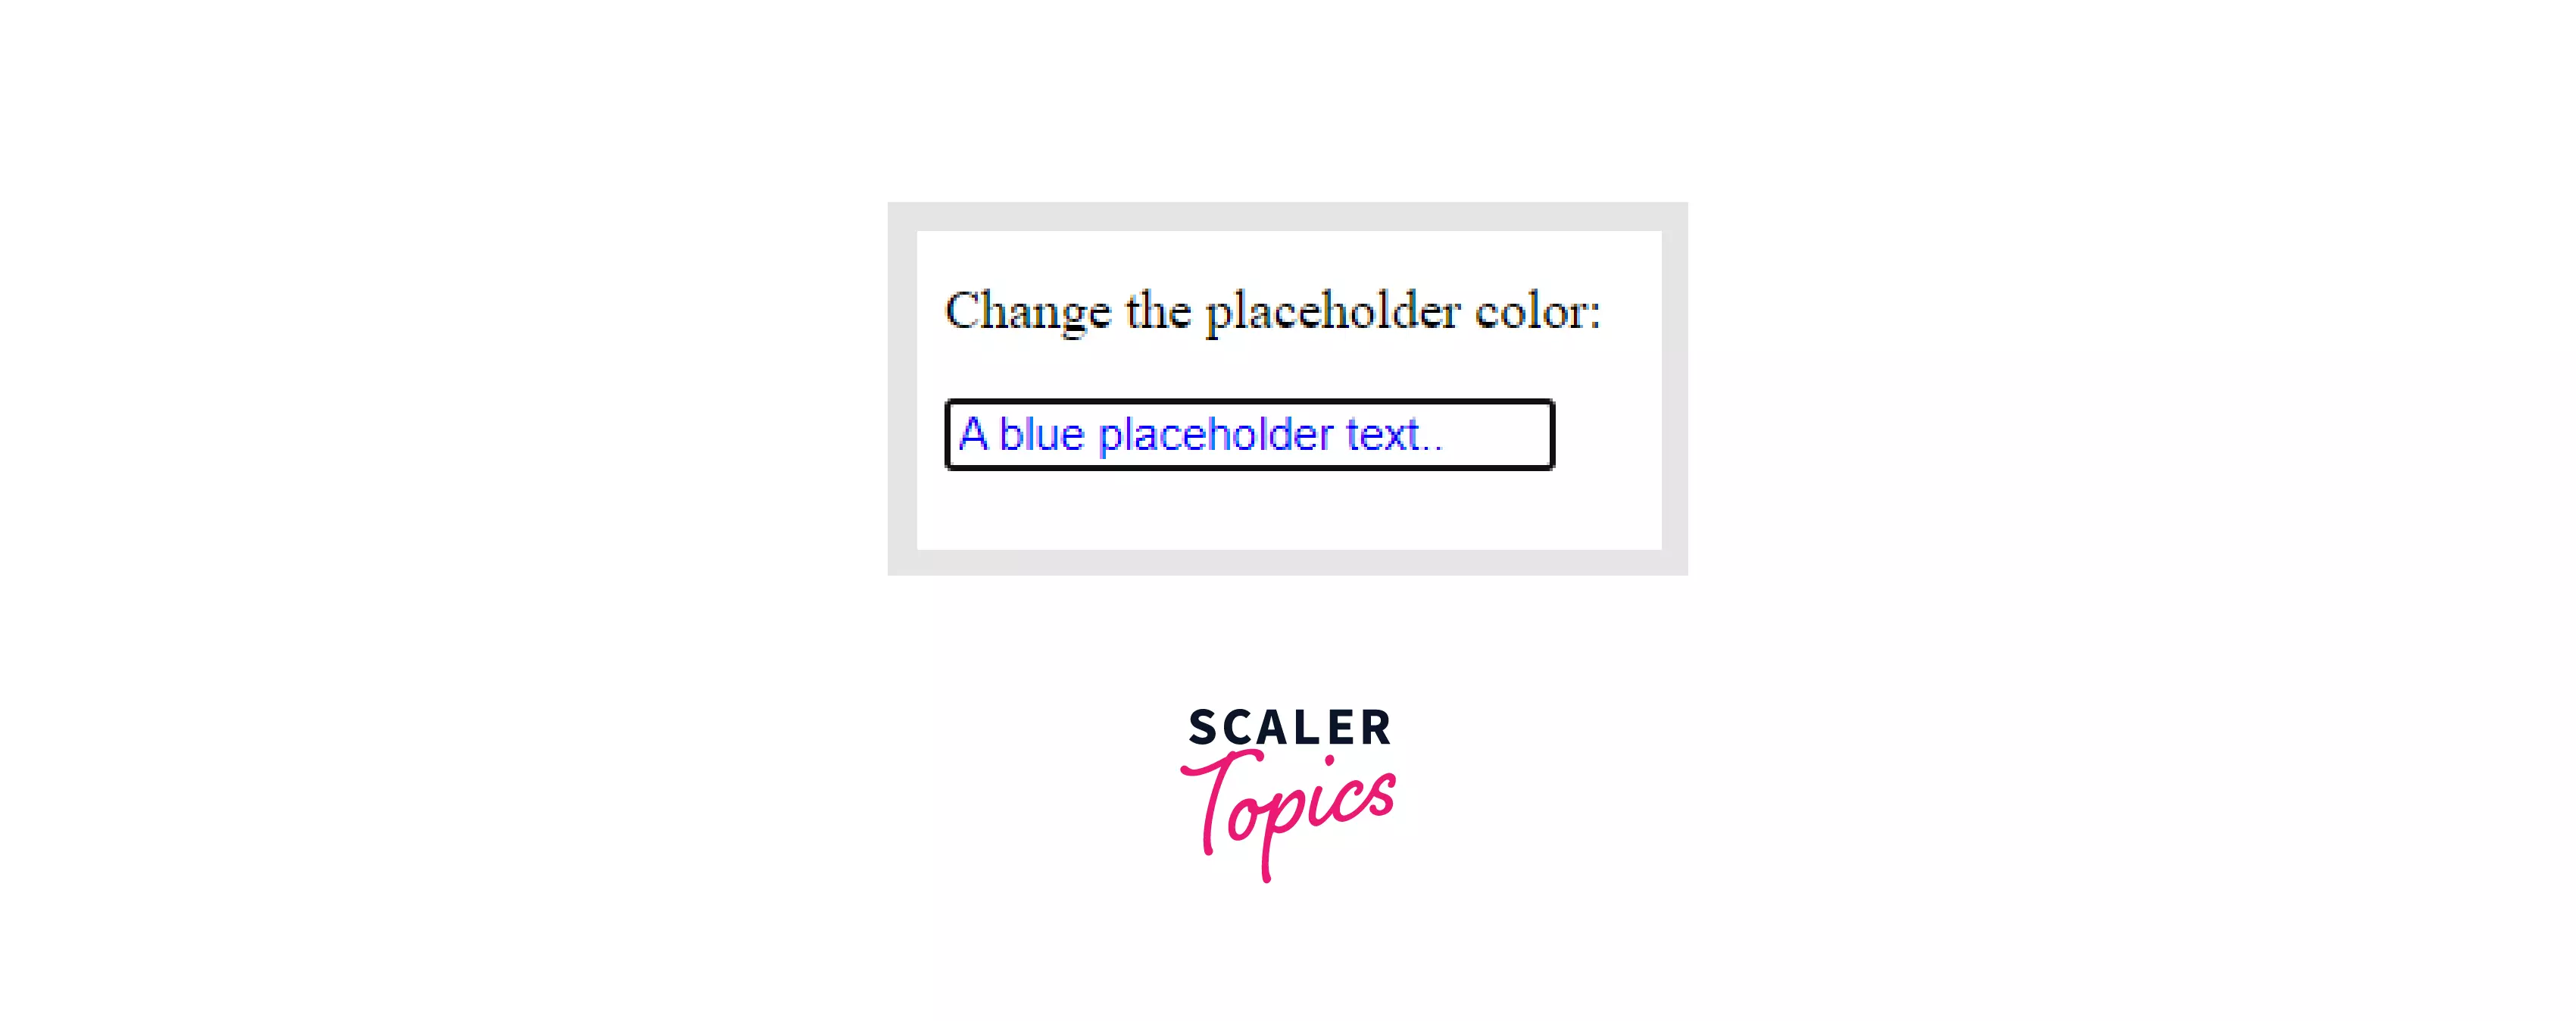 change the placeholder color